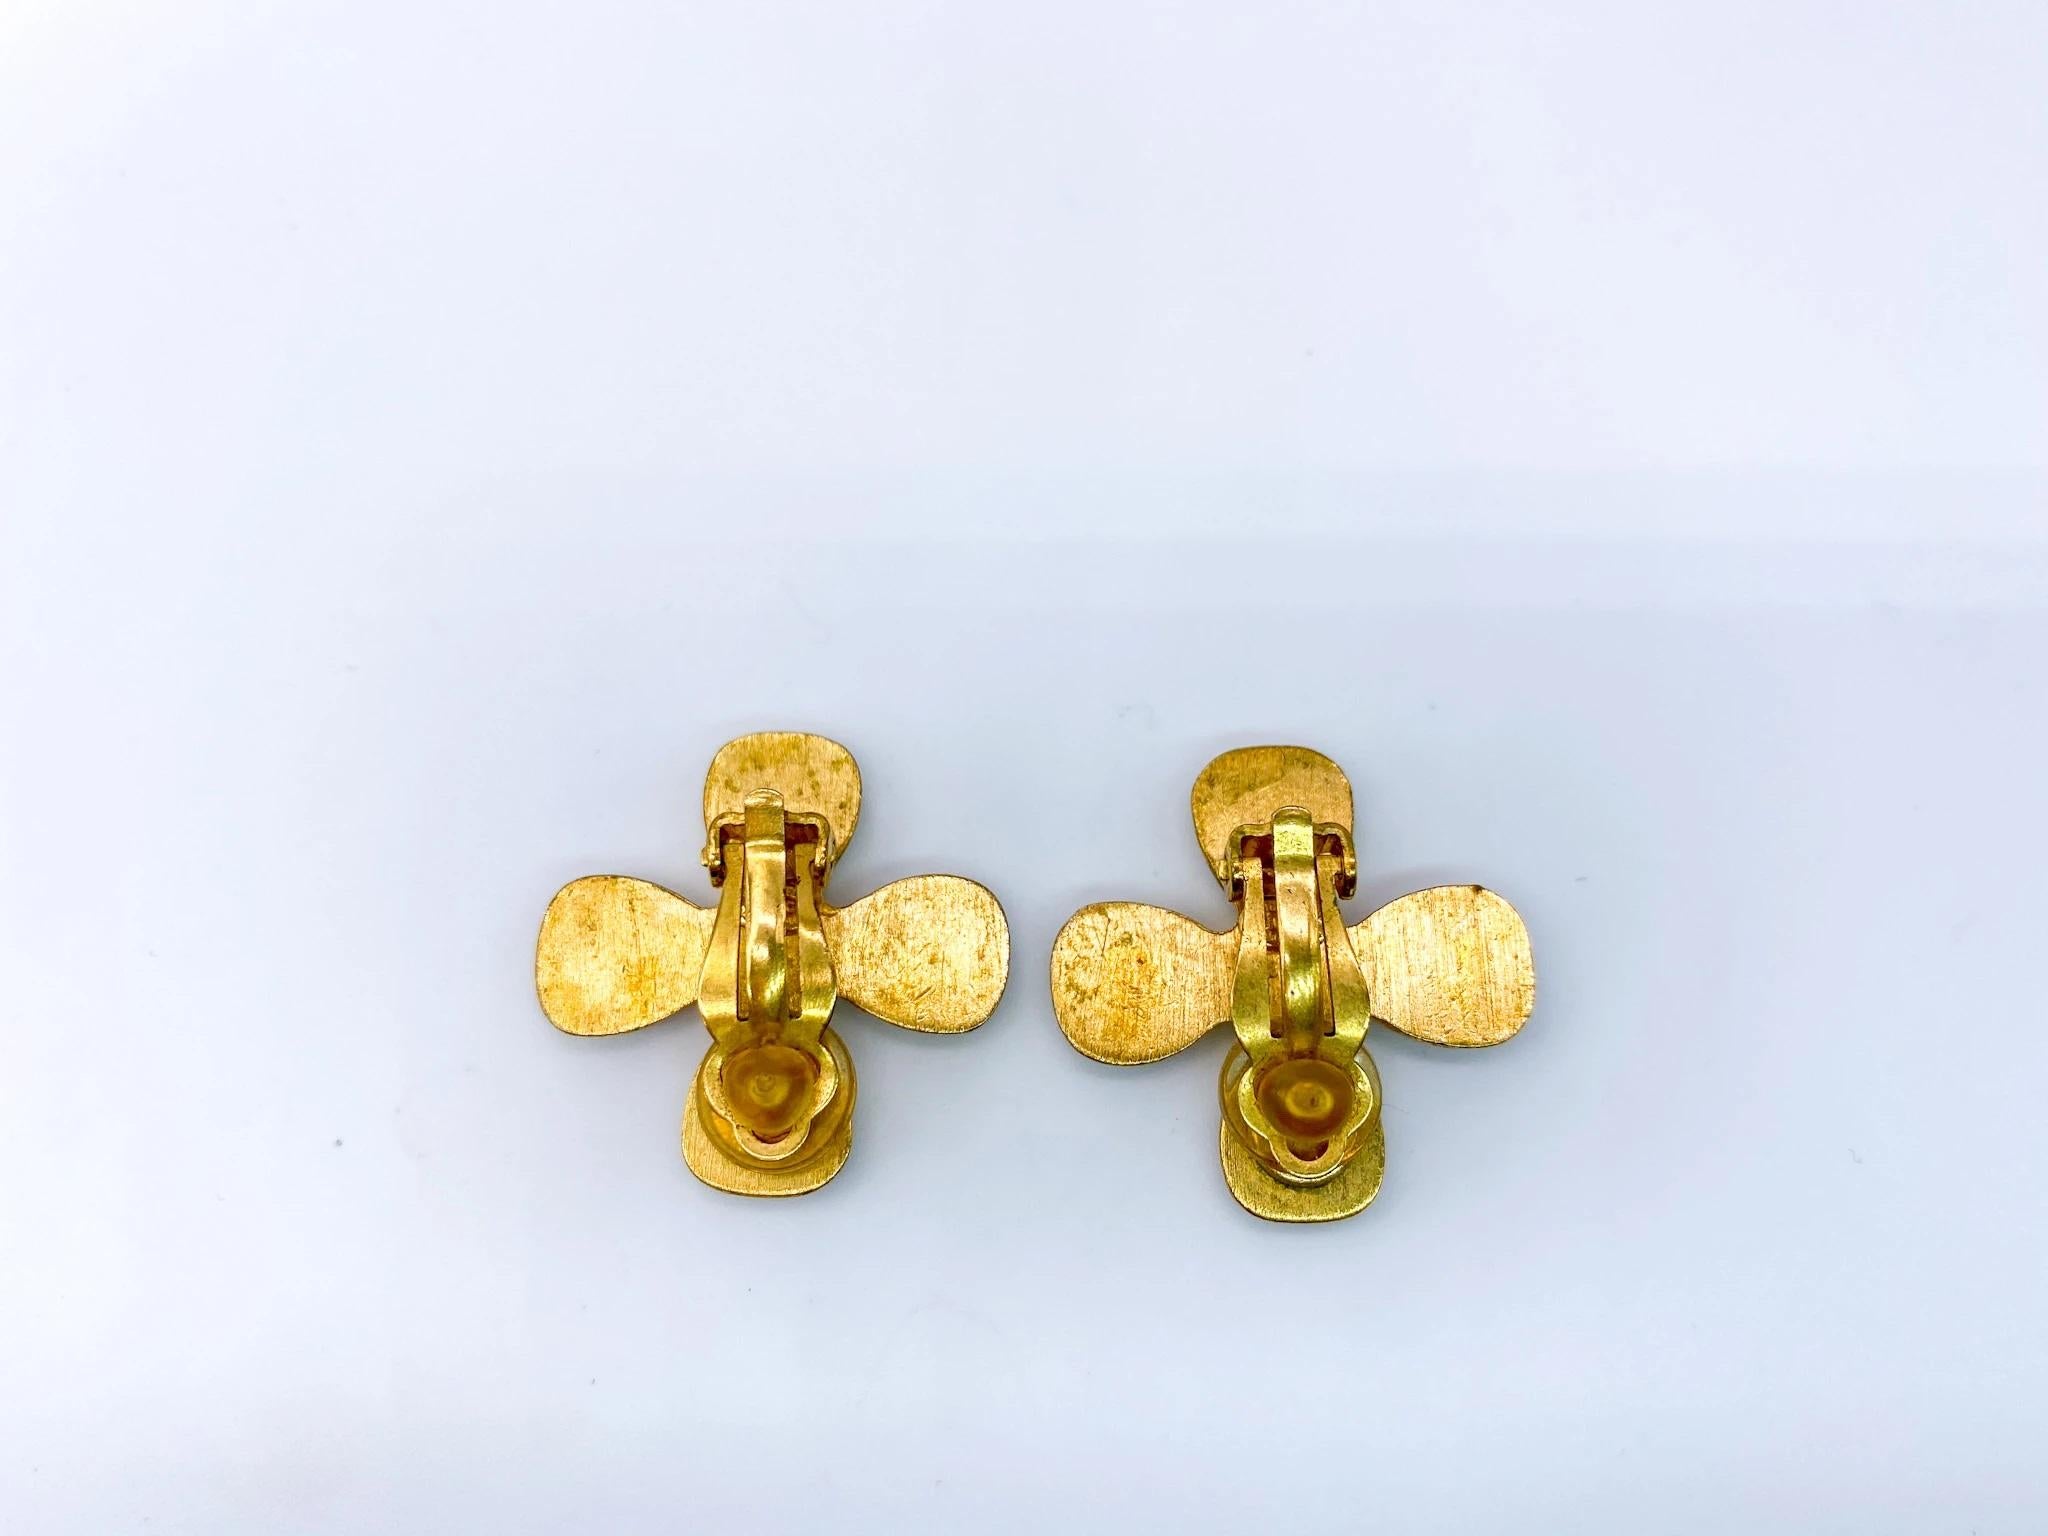 Chanel Earrings Vintage Clip On 2001 Cruise Collection 

Detail
-Made in France for the 2001 Cruise Collection
-Cast from gold plated metal
-Floral design
-Set with tiny crystals 

Size & Fit
-Measure approx 2.3cm / 0.91 inches across
-Good strong